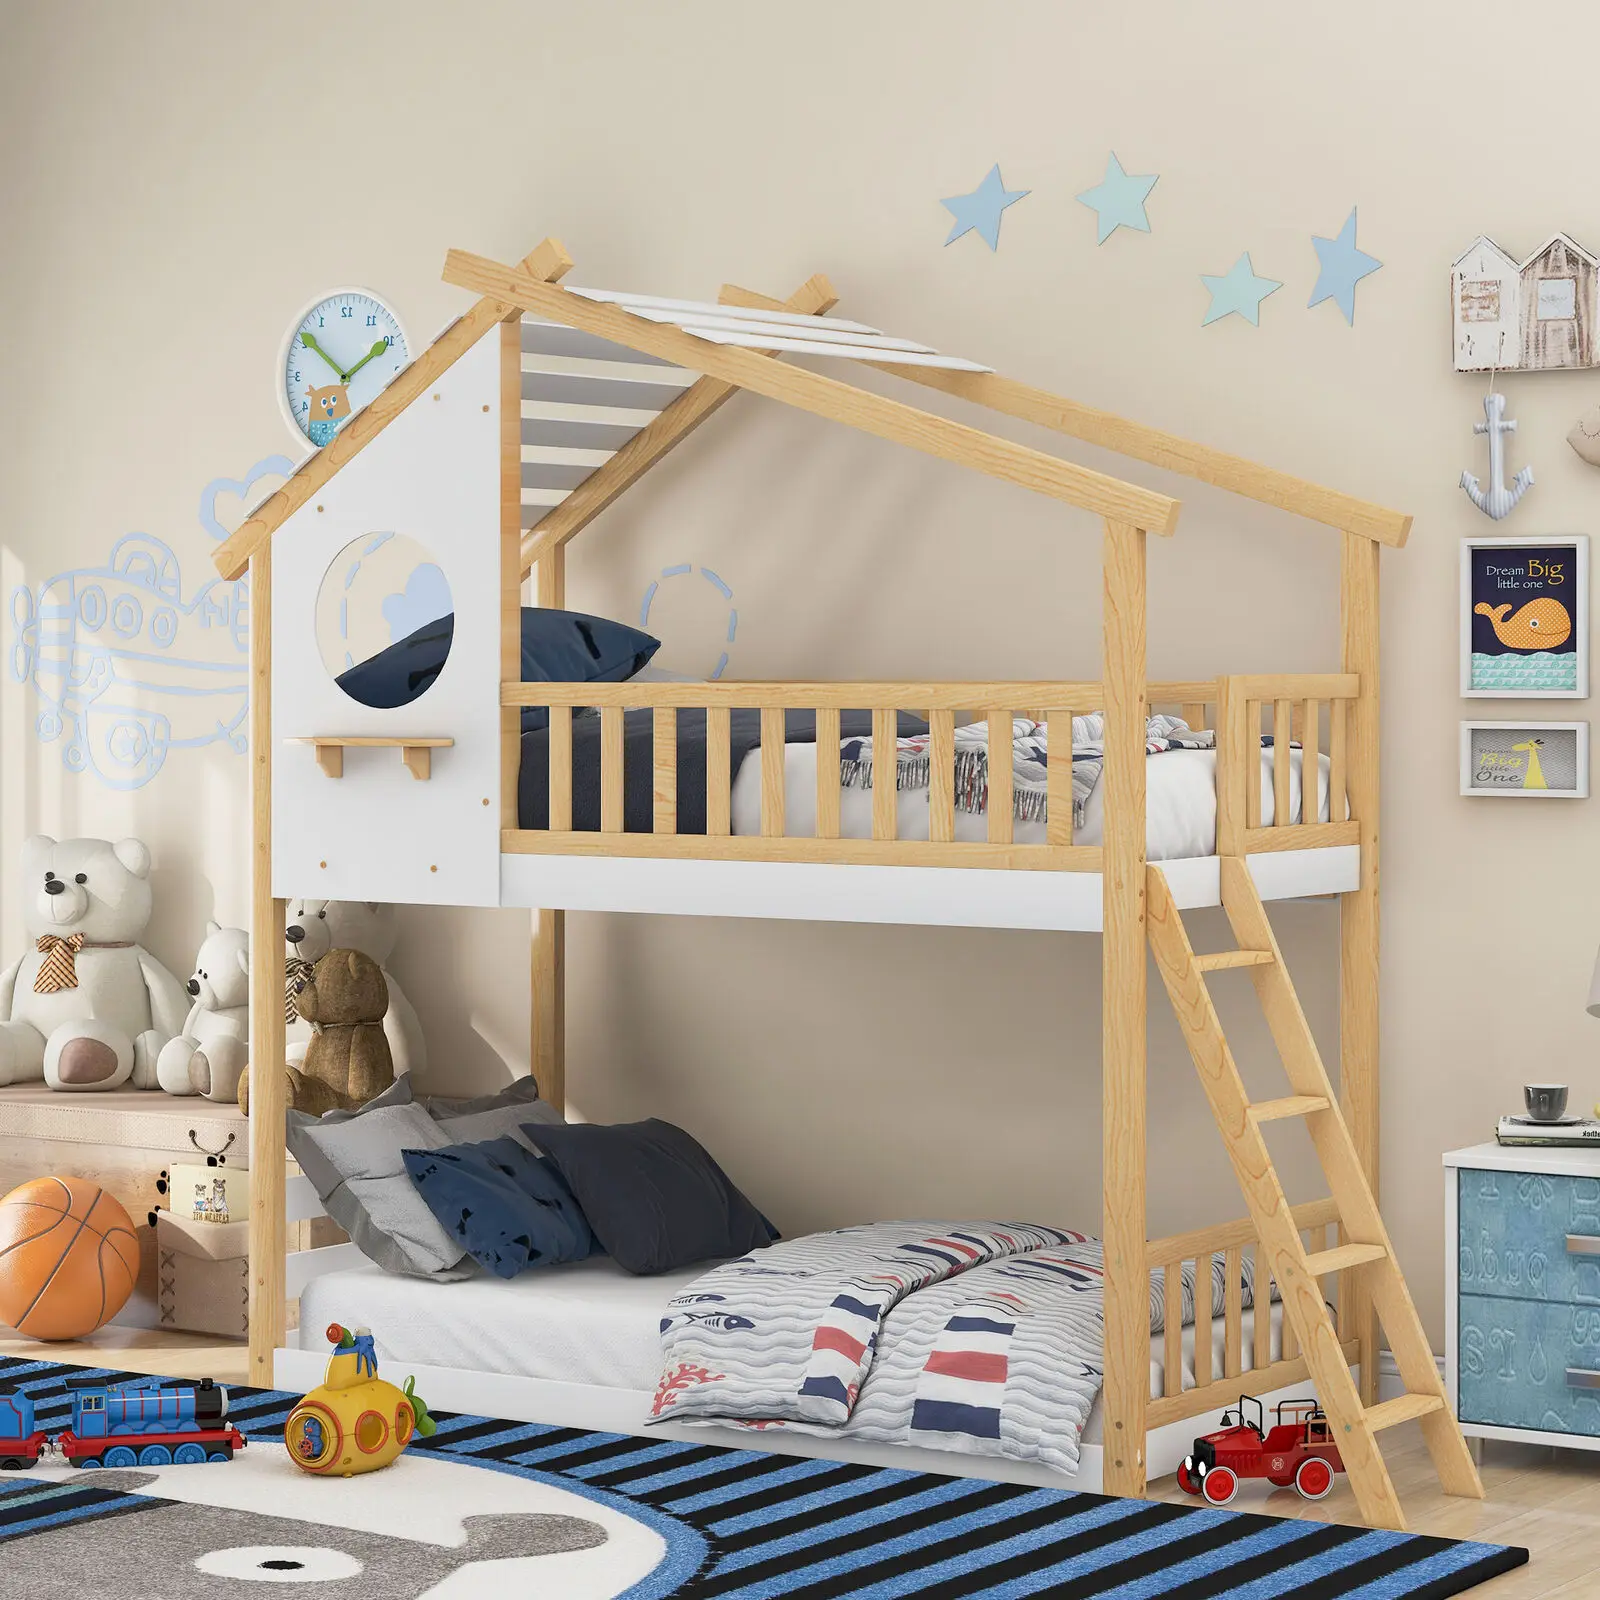 

40.5in Solid Pine Wood Bed Twin Over Twin Bunk Bed Wood Bed With Roof Window And Ladder Children's Beds 2 Seaters Furniture